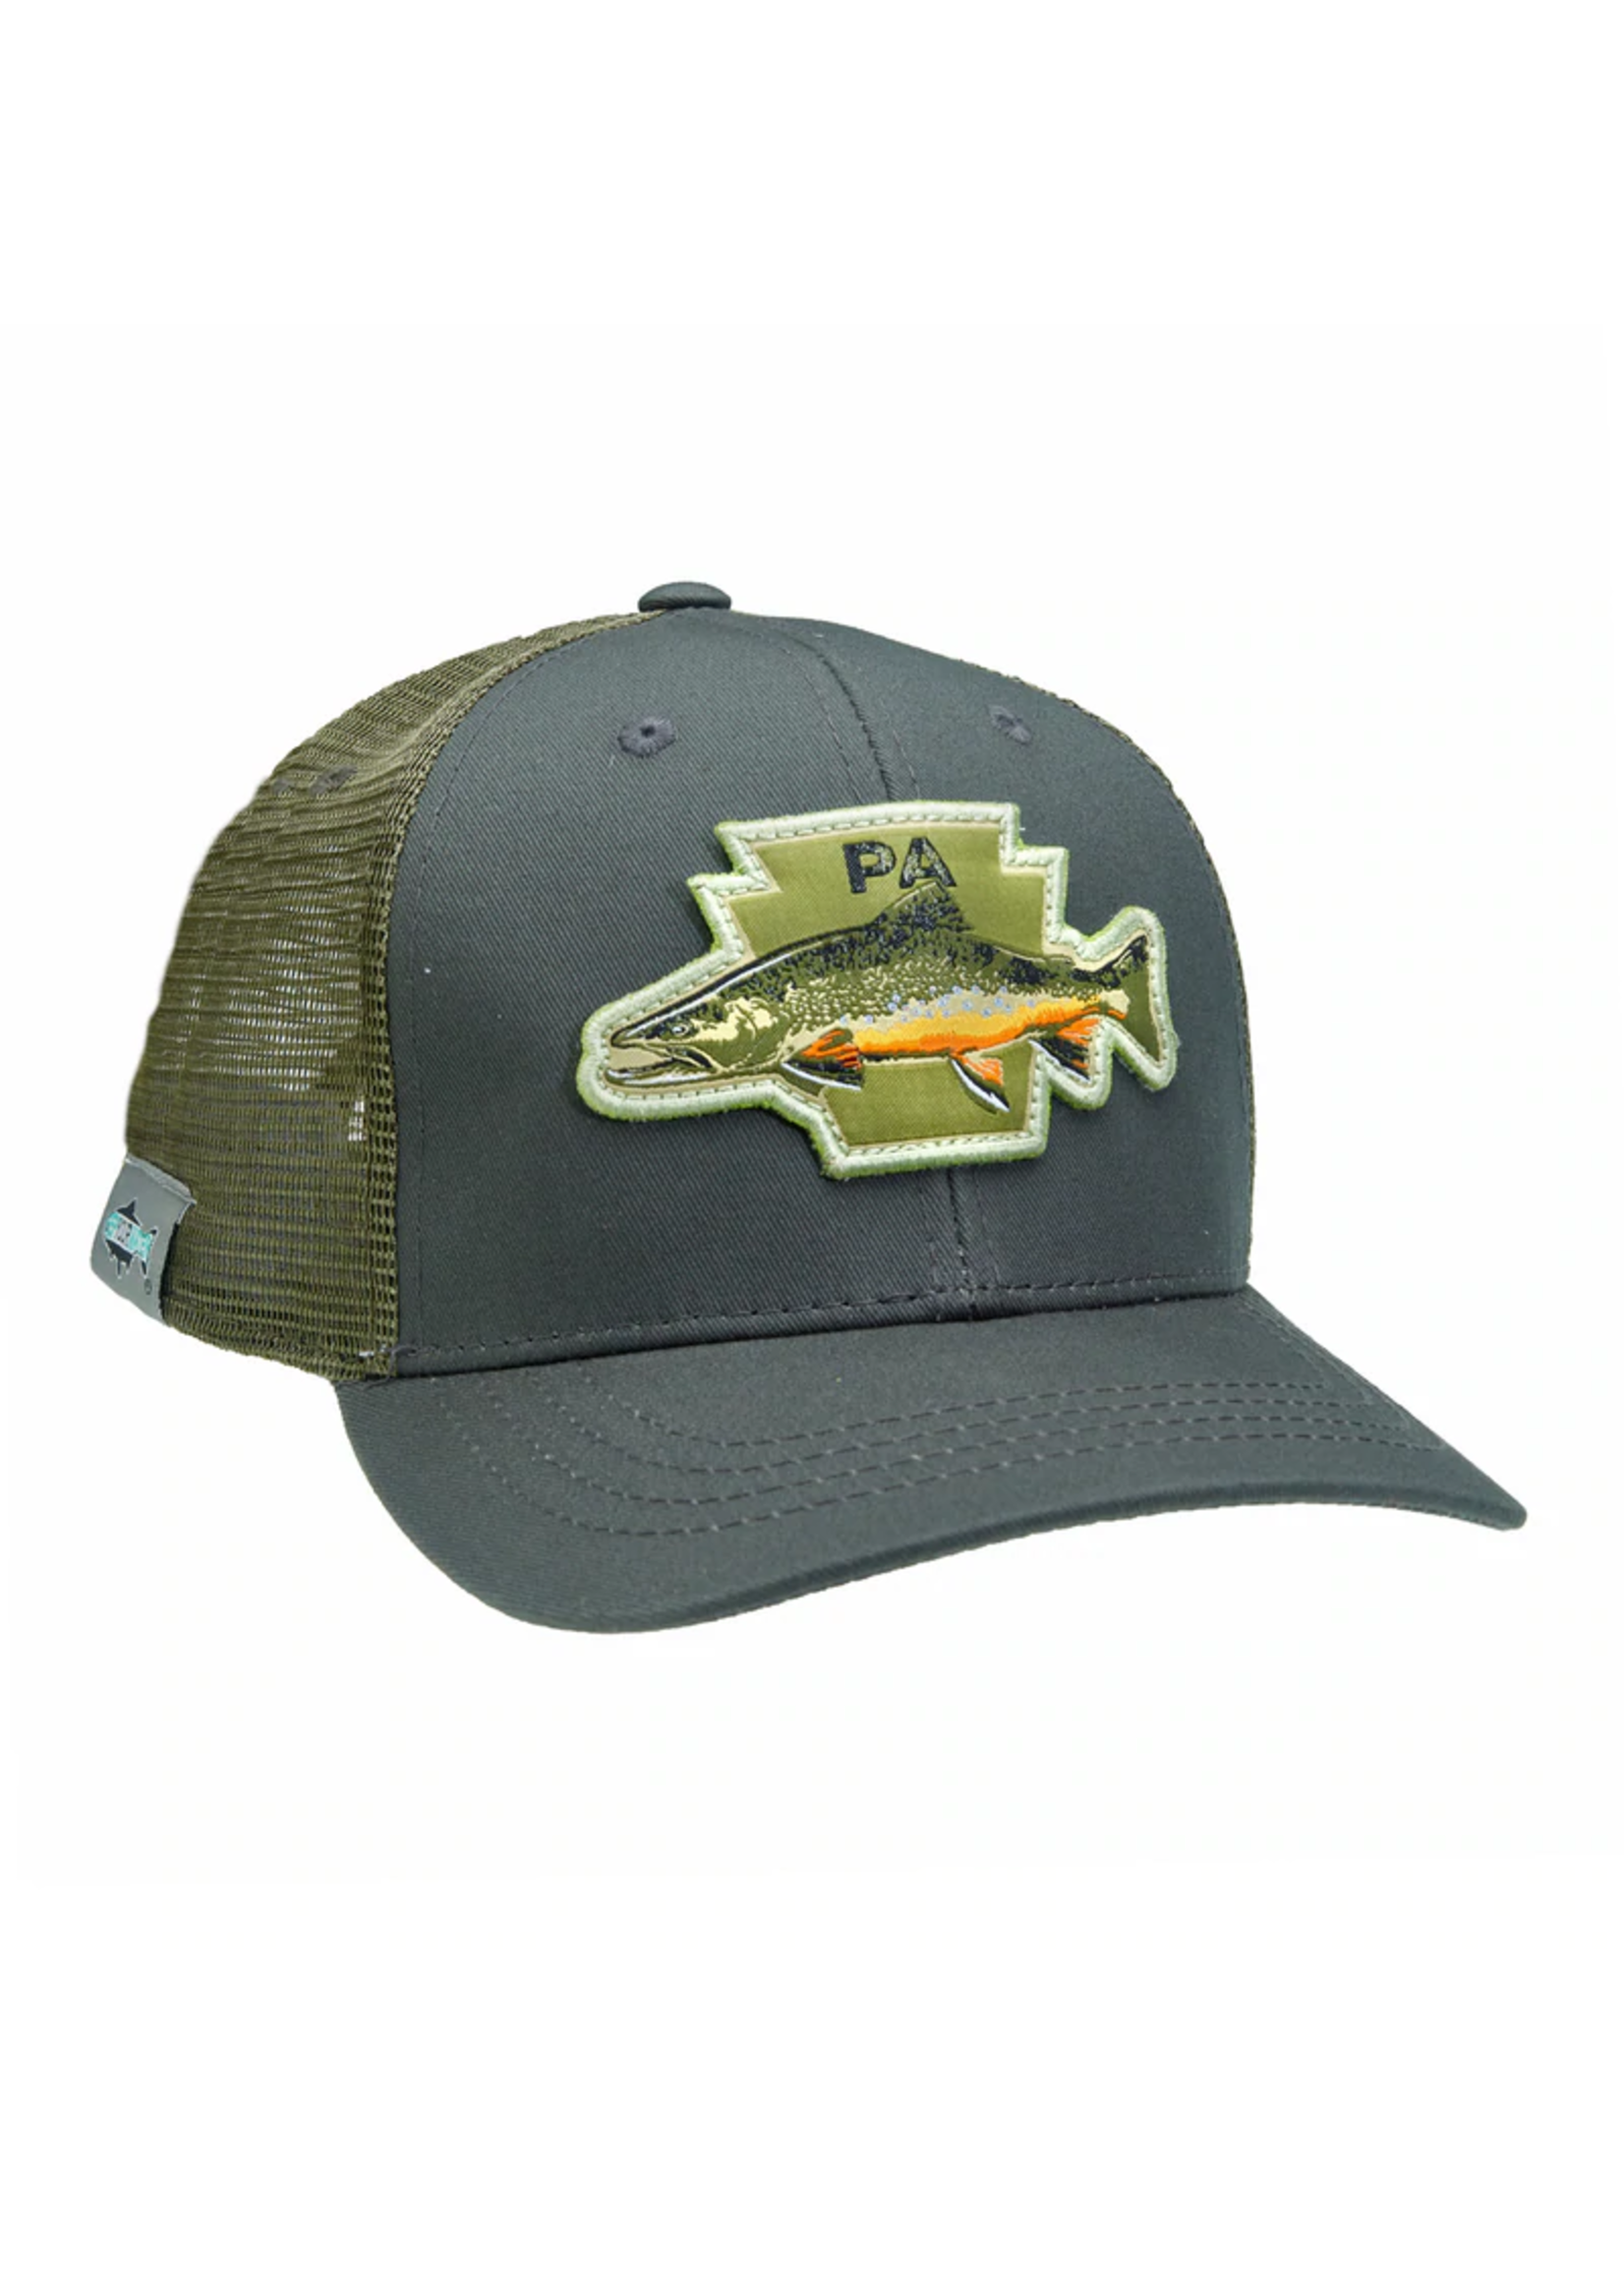 Rep Your Water RepYourWater Pennsylvania Brook Trout Standard Fit Hat